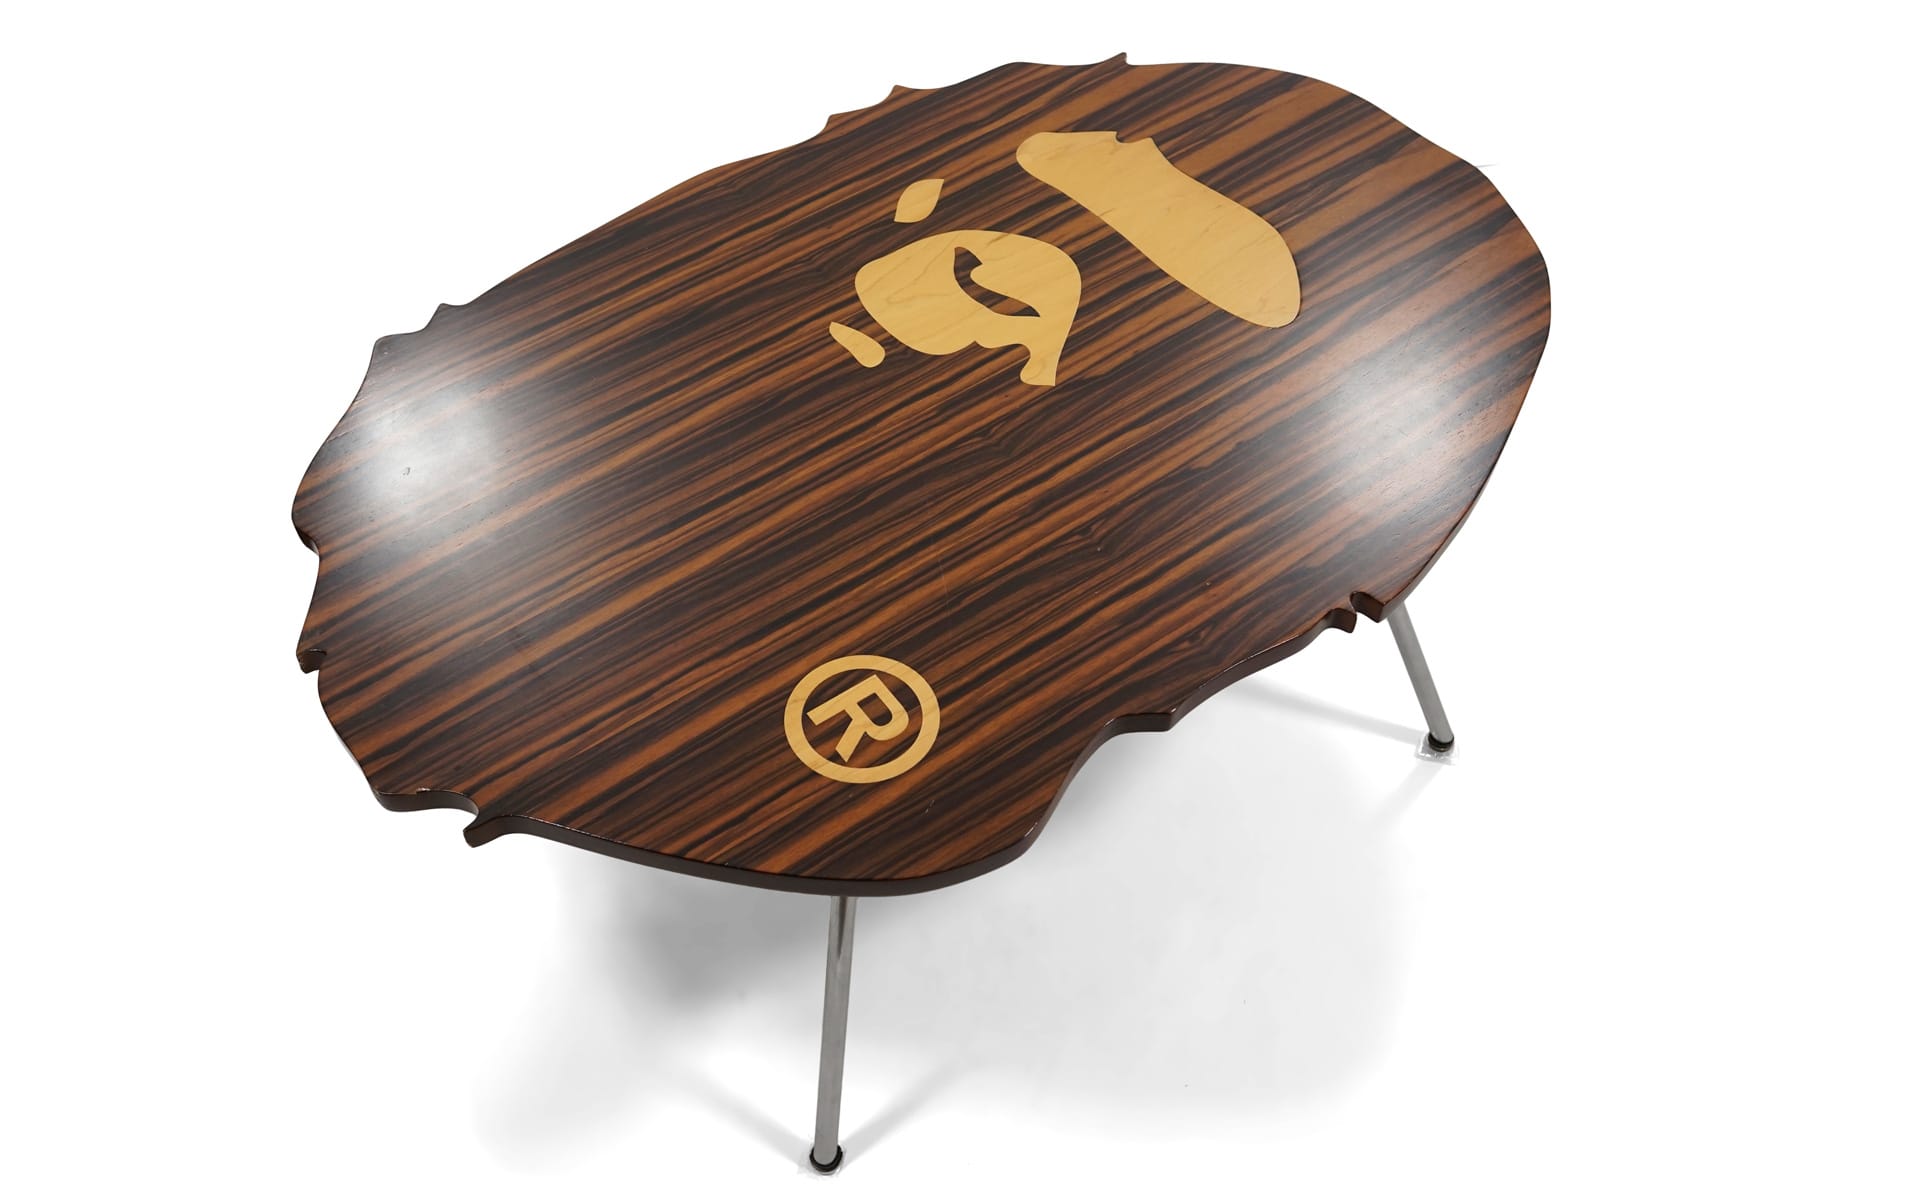 Apehead Coffee Table - The 25 Best Bape Items | Complex